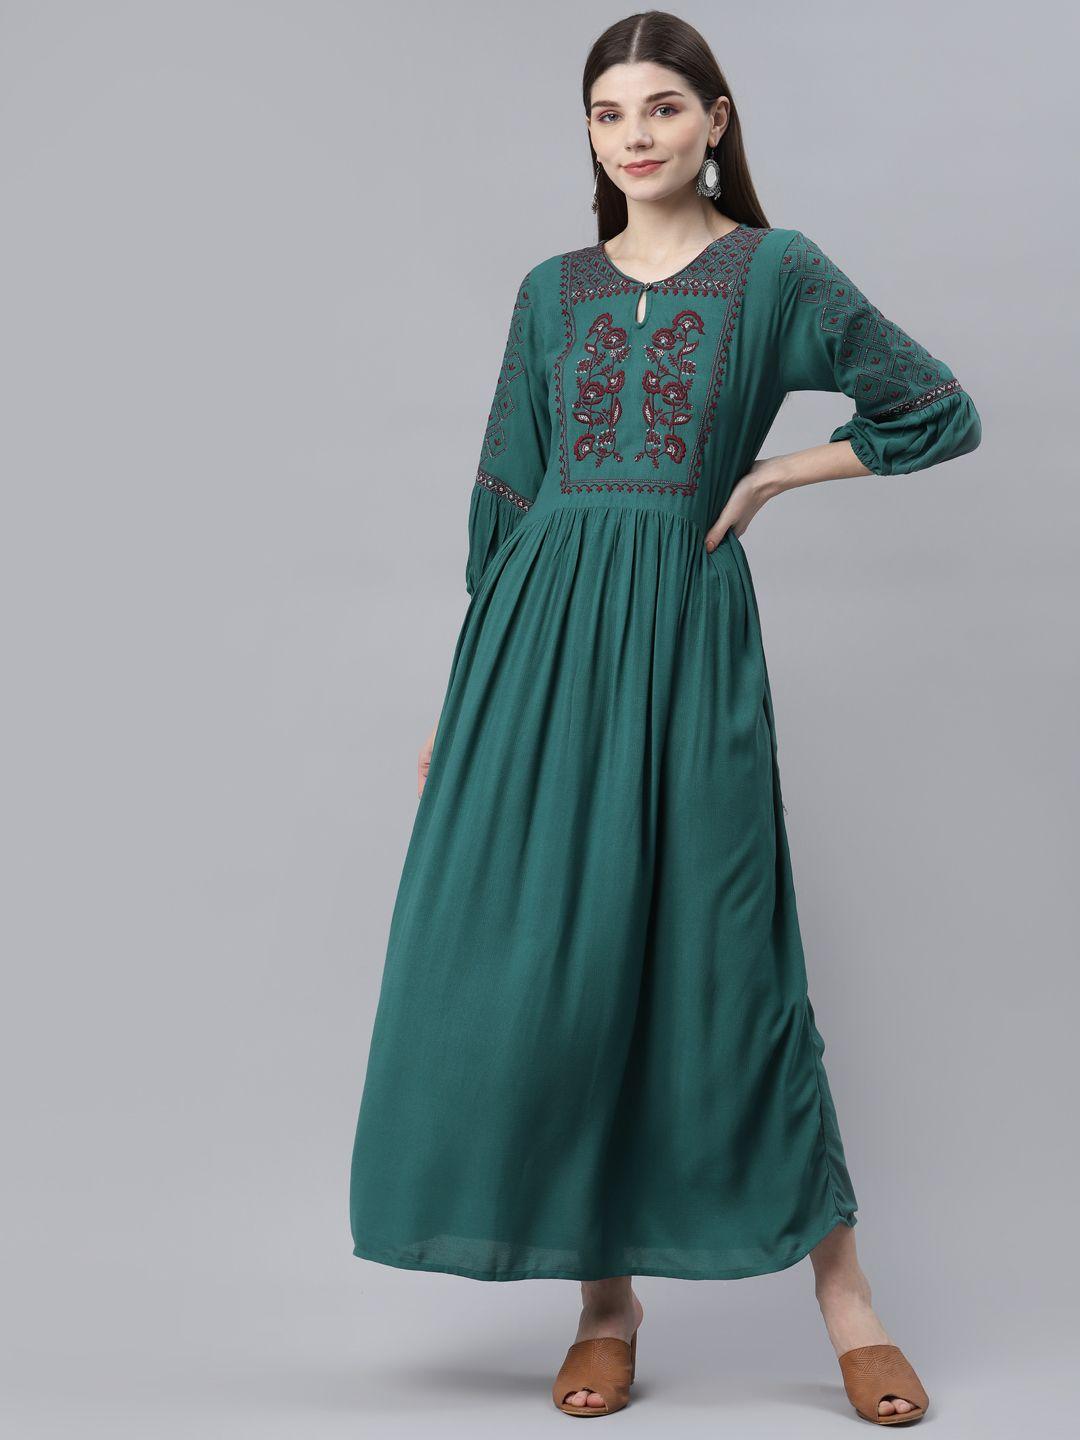 silver-stock-green-floral-embroidered-keyhole-neck-maxi-dress